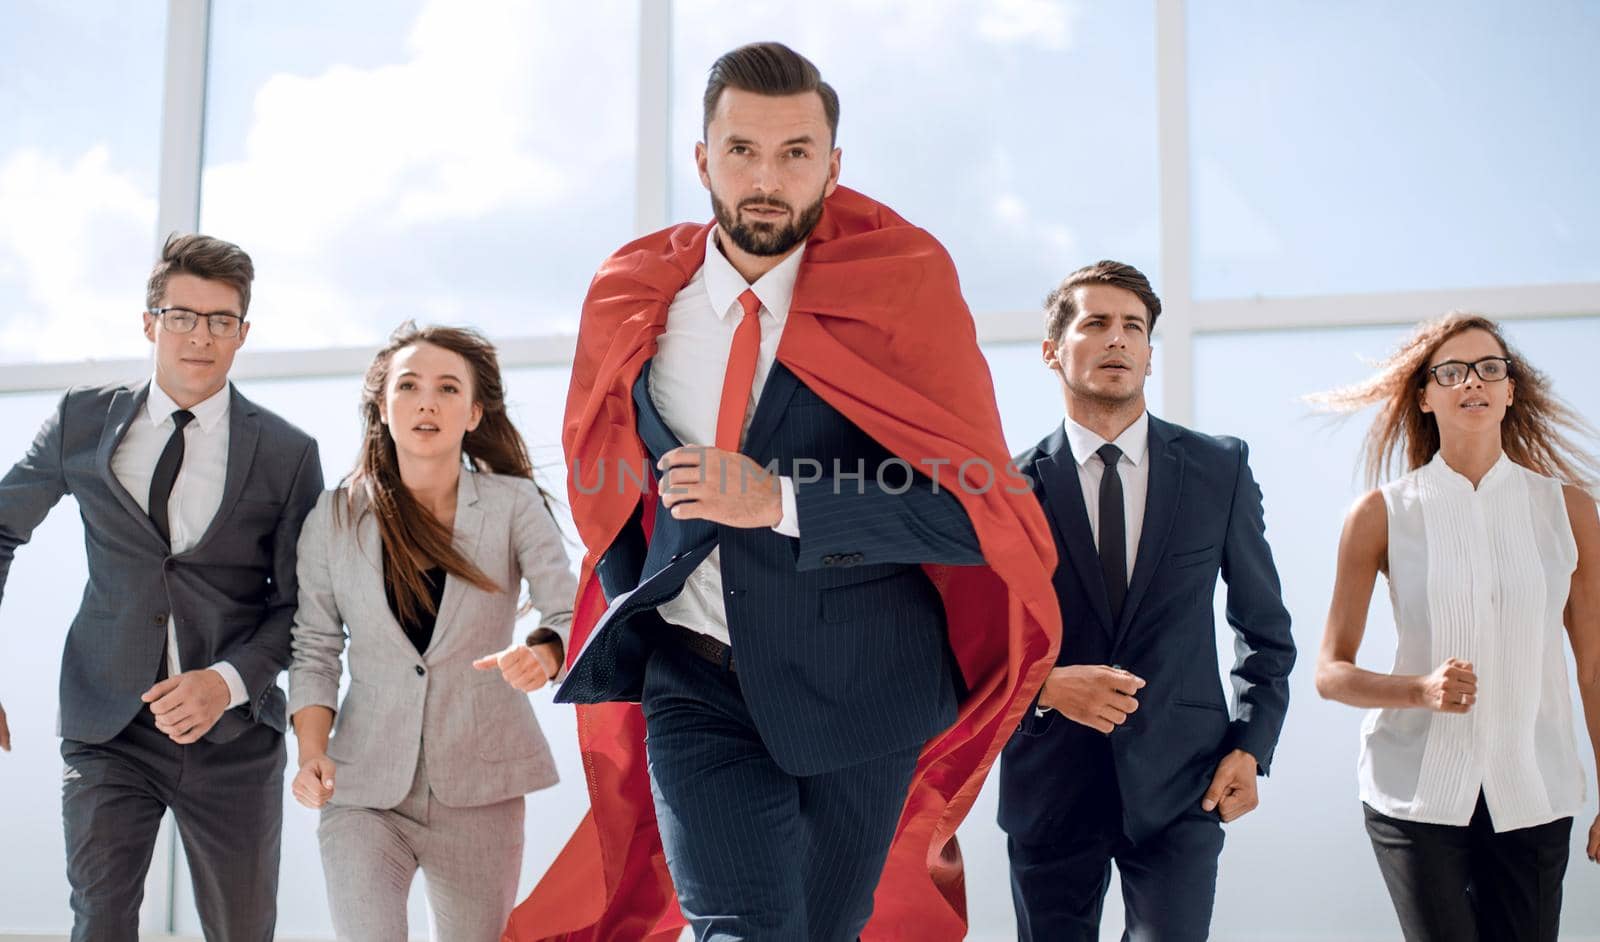 businessman superhero and his business team are stepping together.photo with copy space